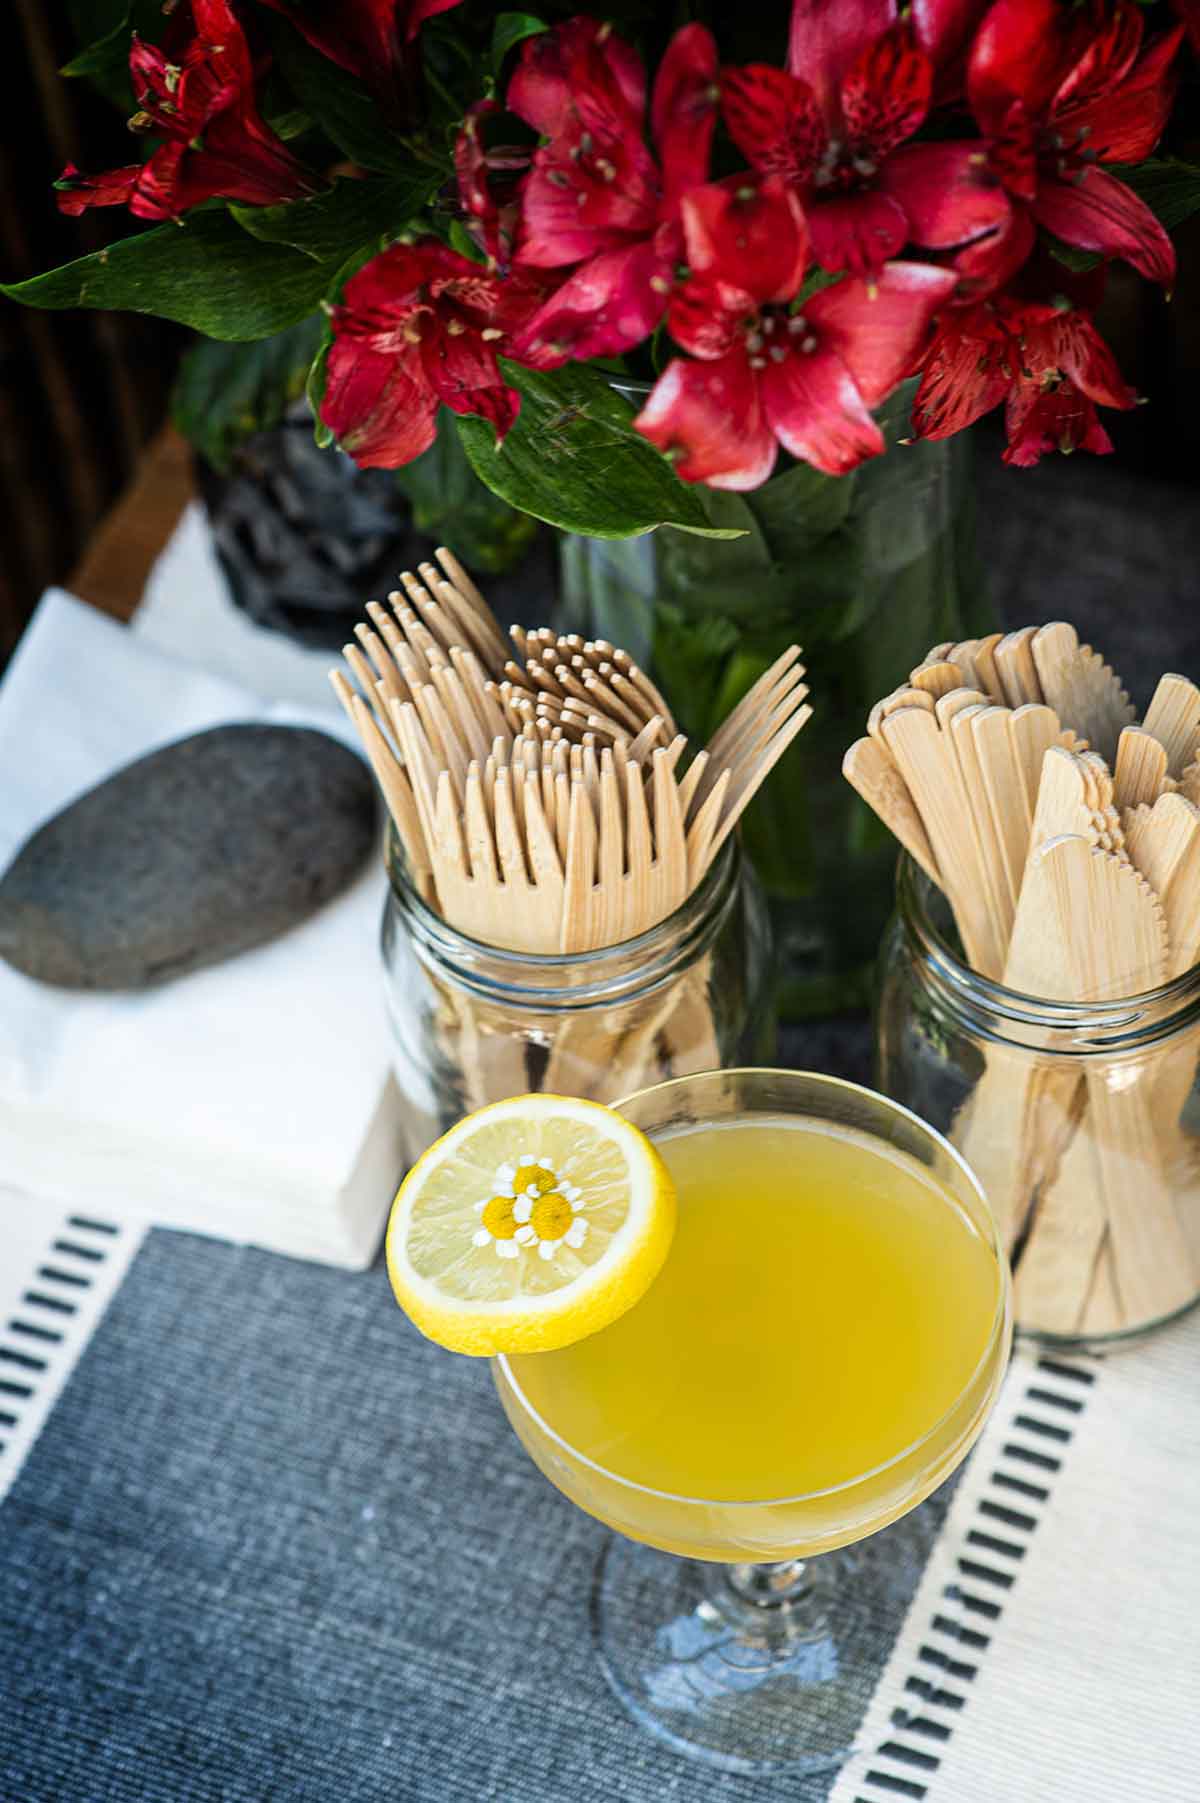 A lemon garnished cocktail on a table beside wooden knives, forks and flowers.